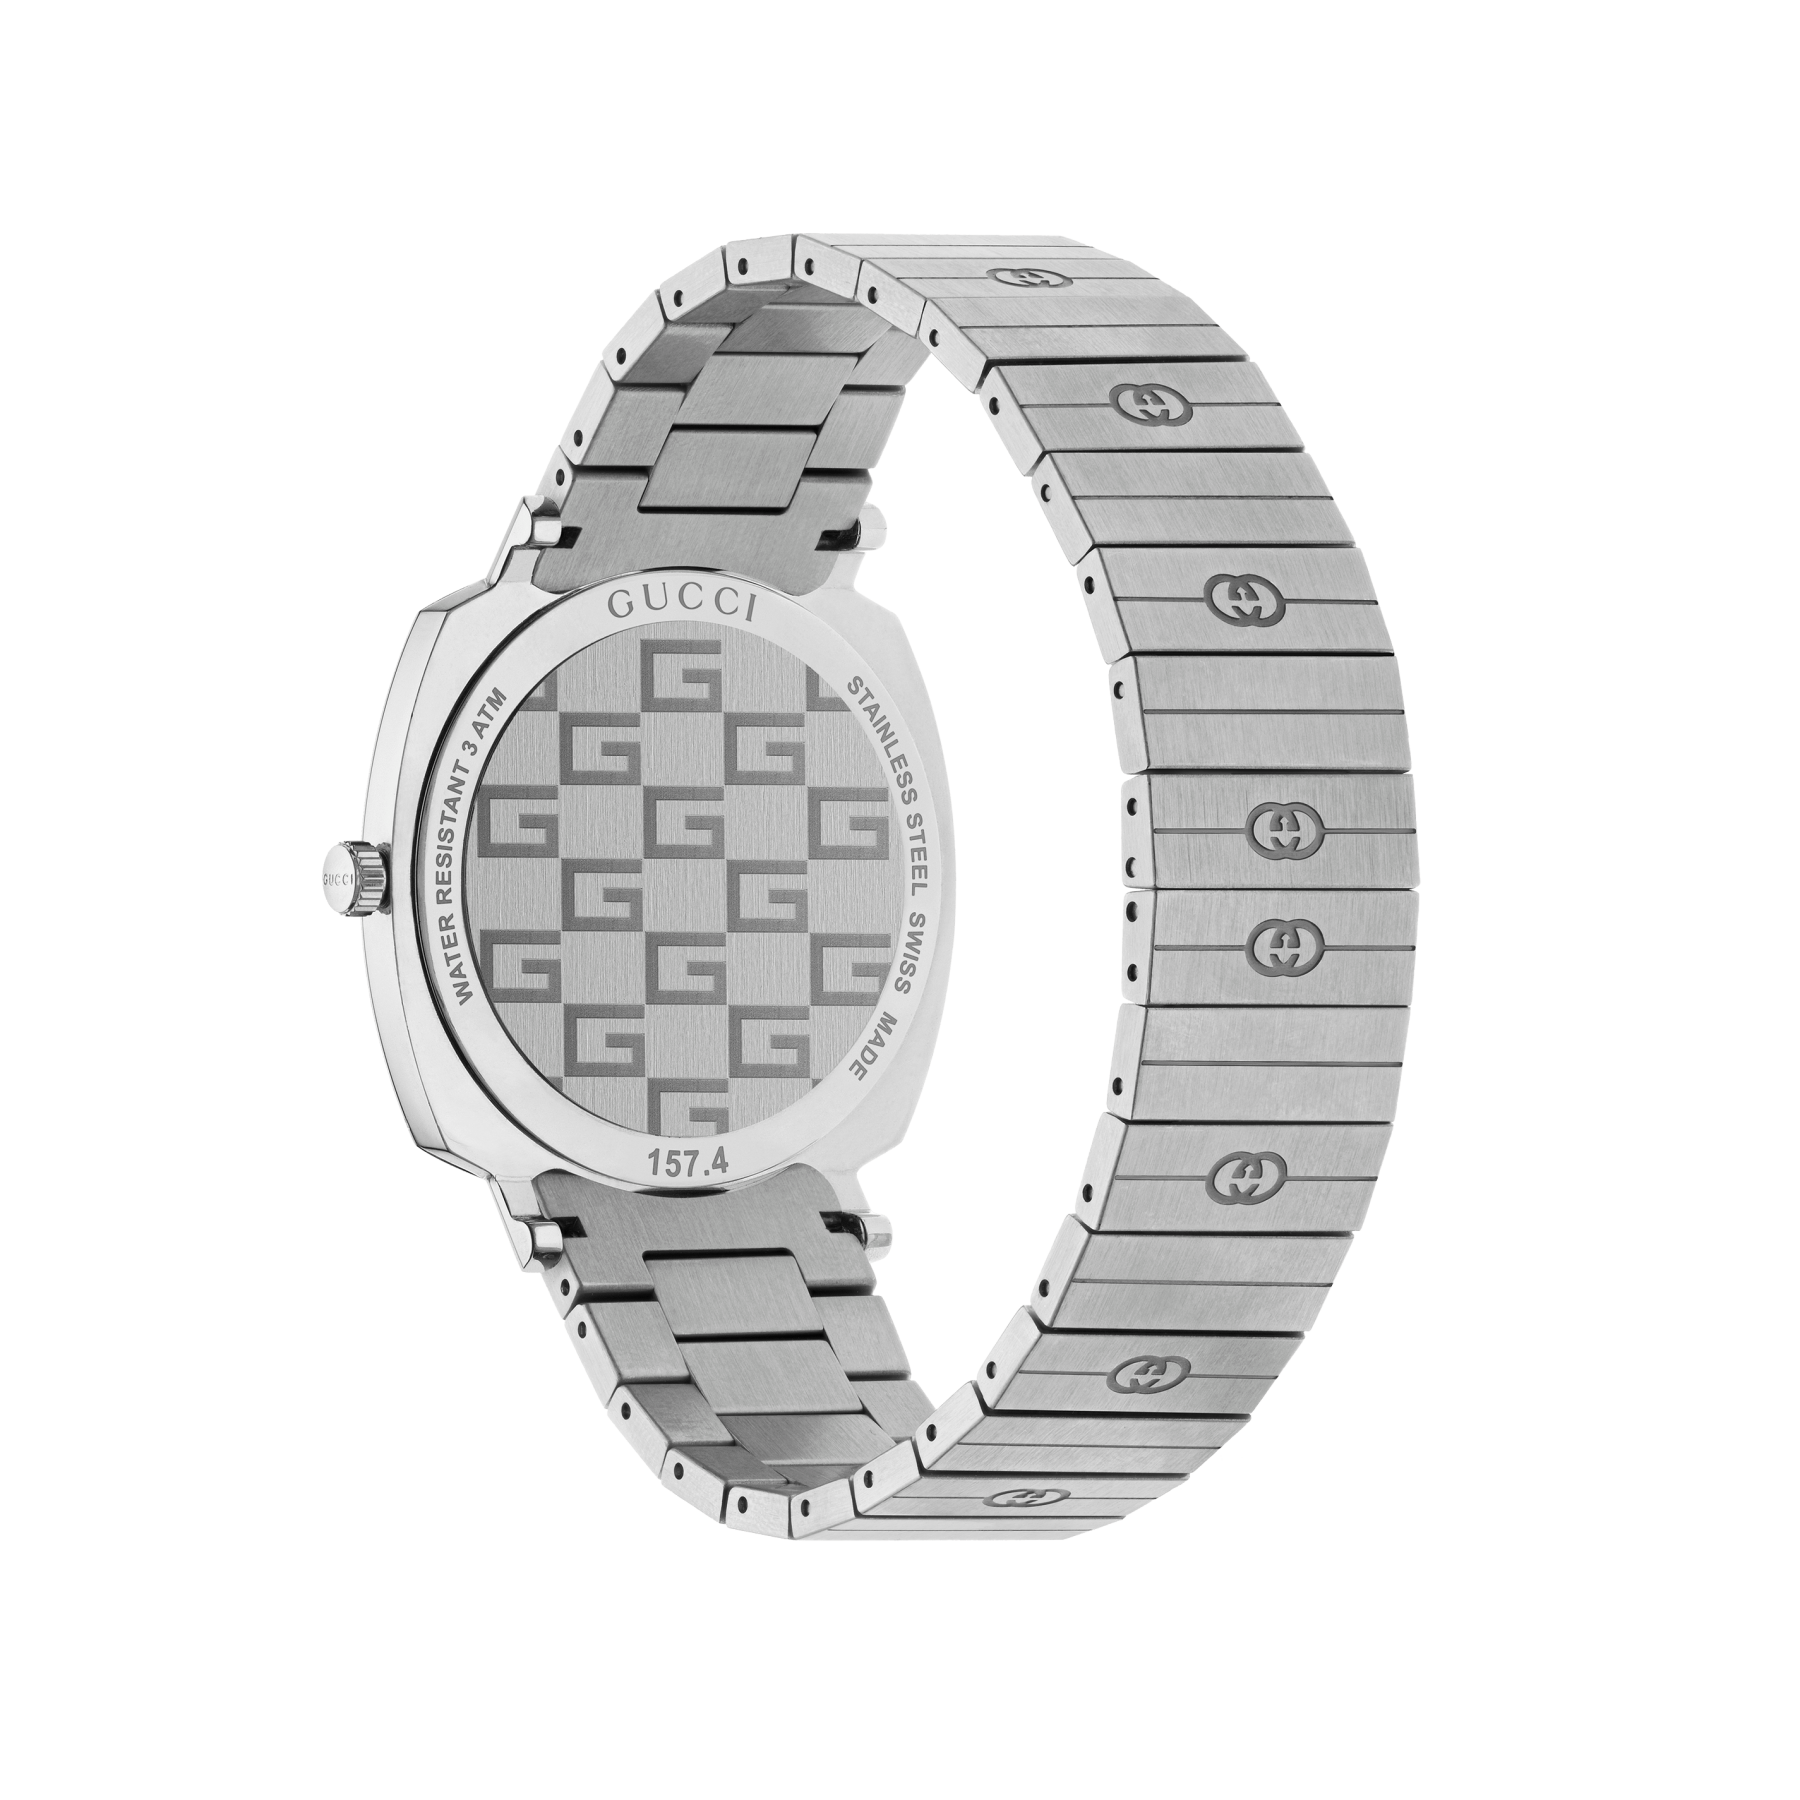 Gucci Grip Stainless Steel Watch – 35mm back view